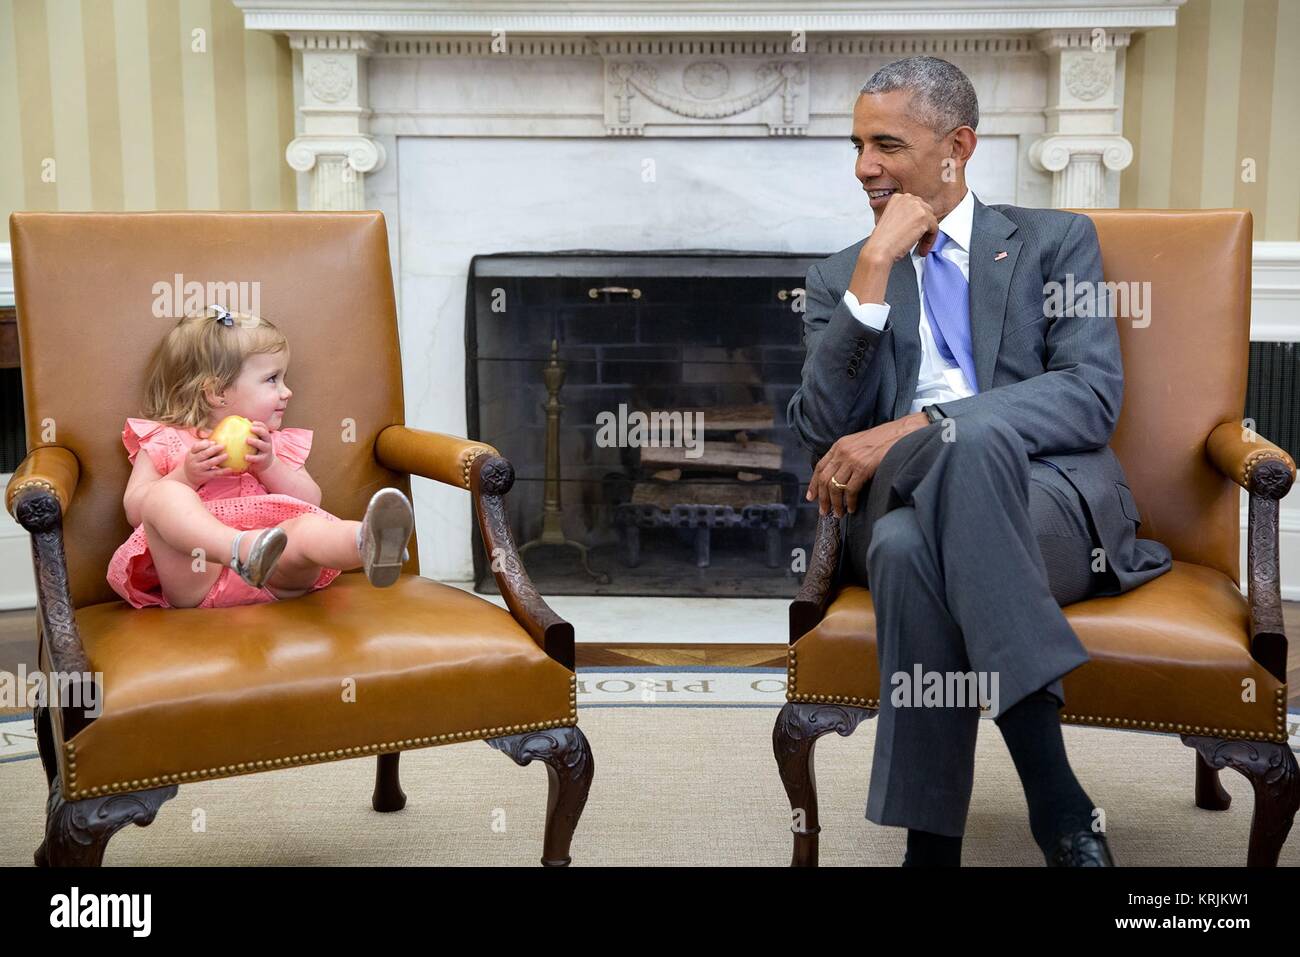 U.S. President Barack Obama speaks to a young girl in the White House Oval Office June 22, 2016 in Washington, DC. Stock Photo